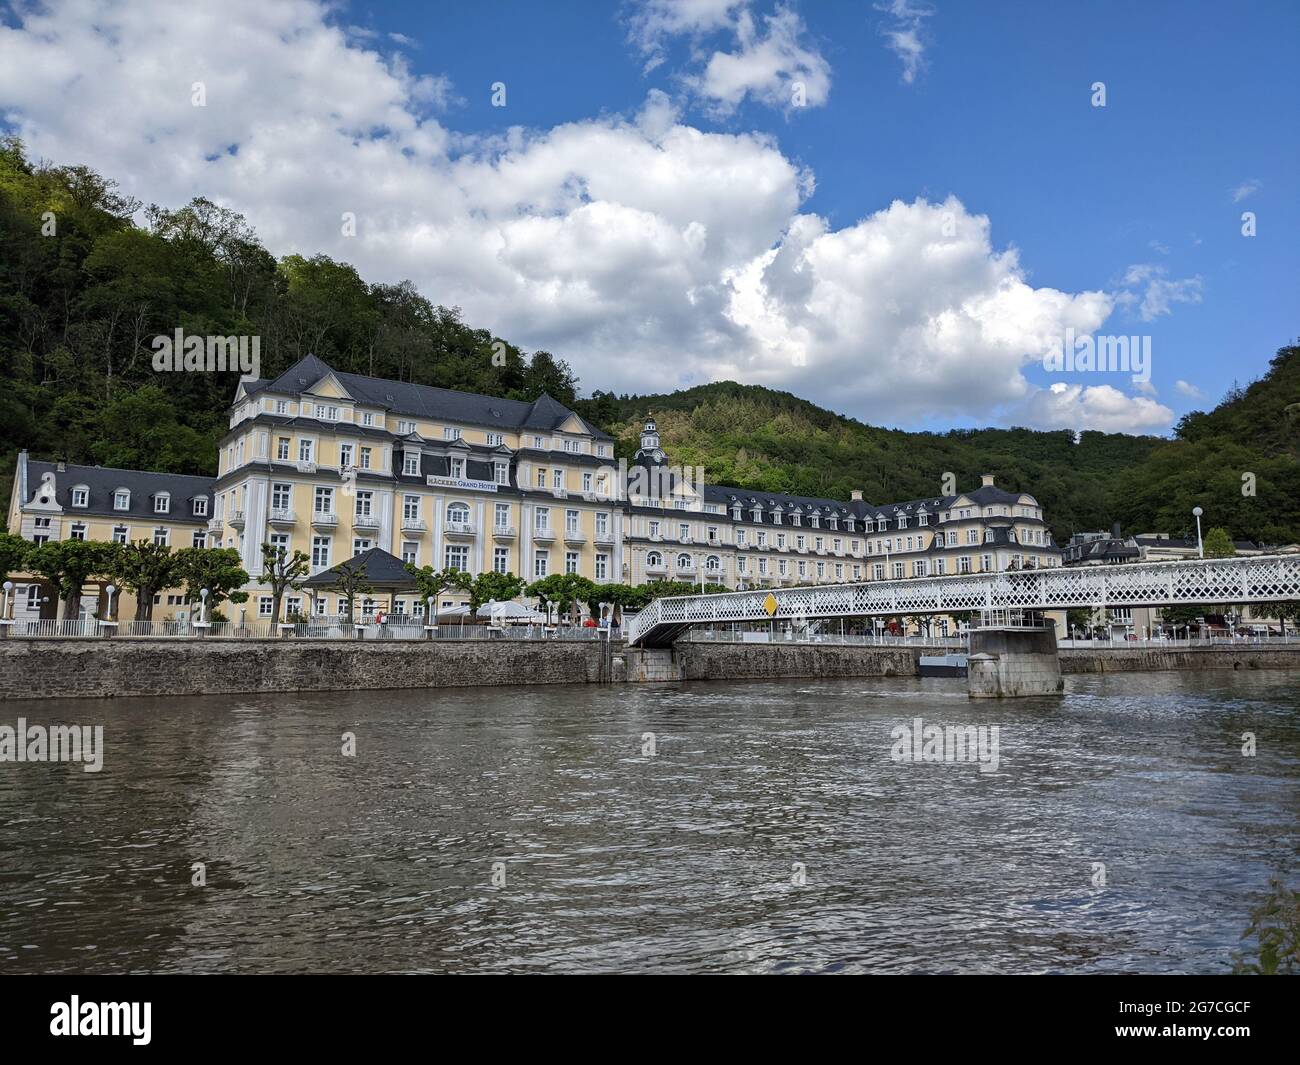 View over the river Lahn to the spectacular Kurhaus in Bad Ems, an emperor's  spa and wellness town in Rhineland Palatinate/Rheinland-Pfalz, Germany. Stock Photo